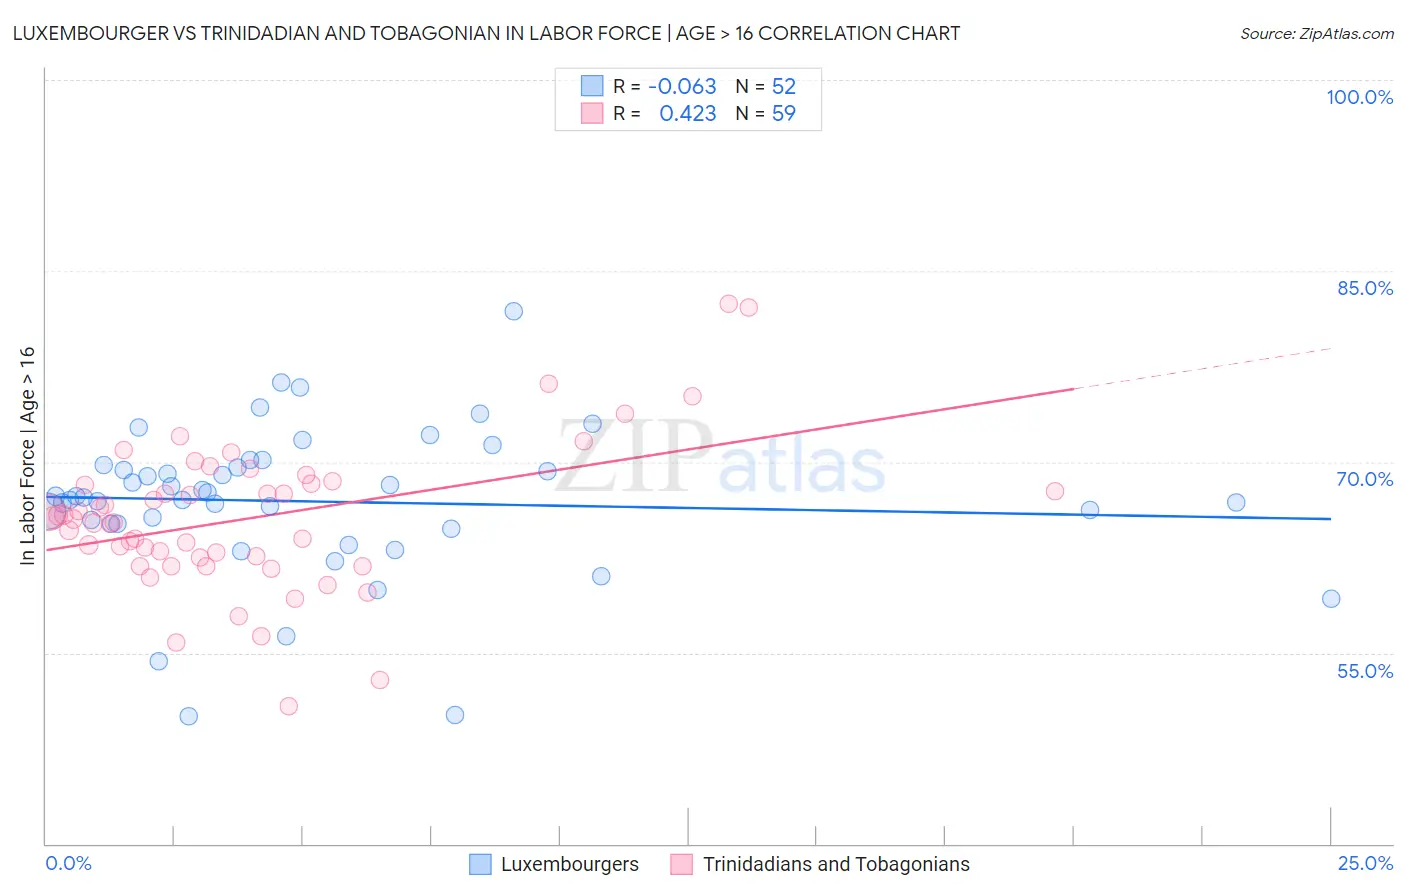 Luxembourger vs Trinidadian and Tobagonian In Labor Force | Age > 16